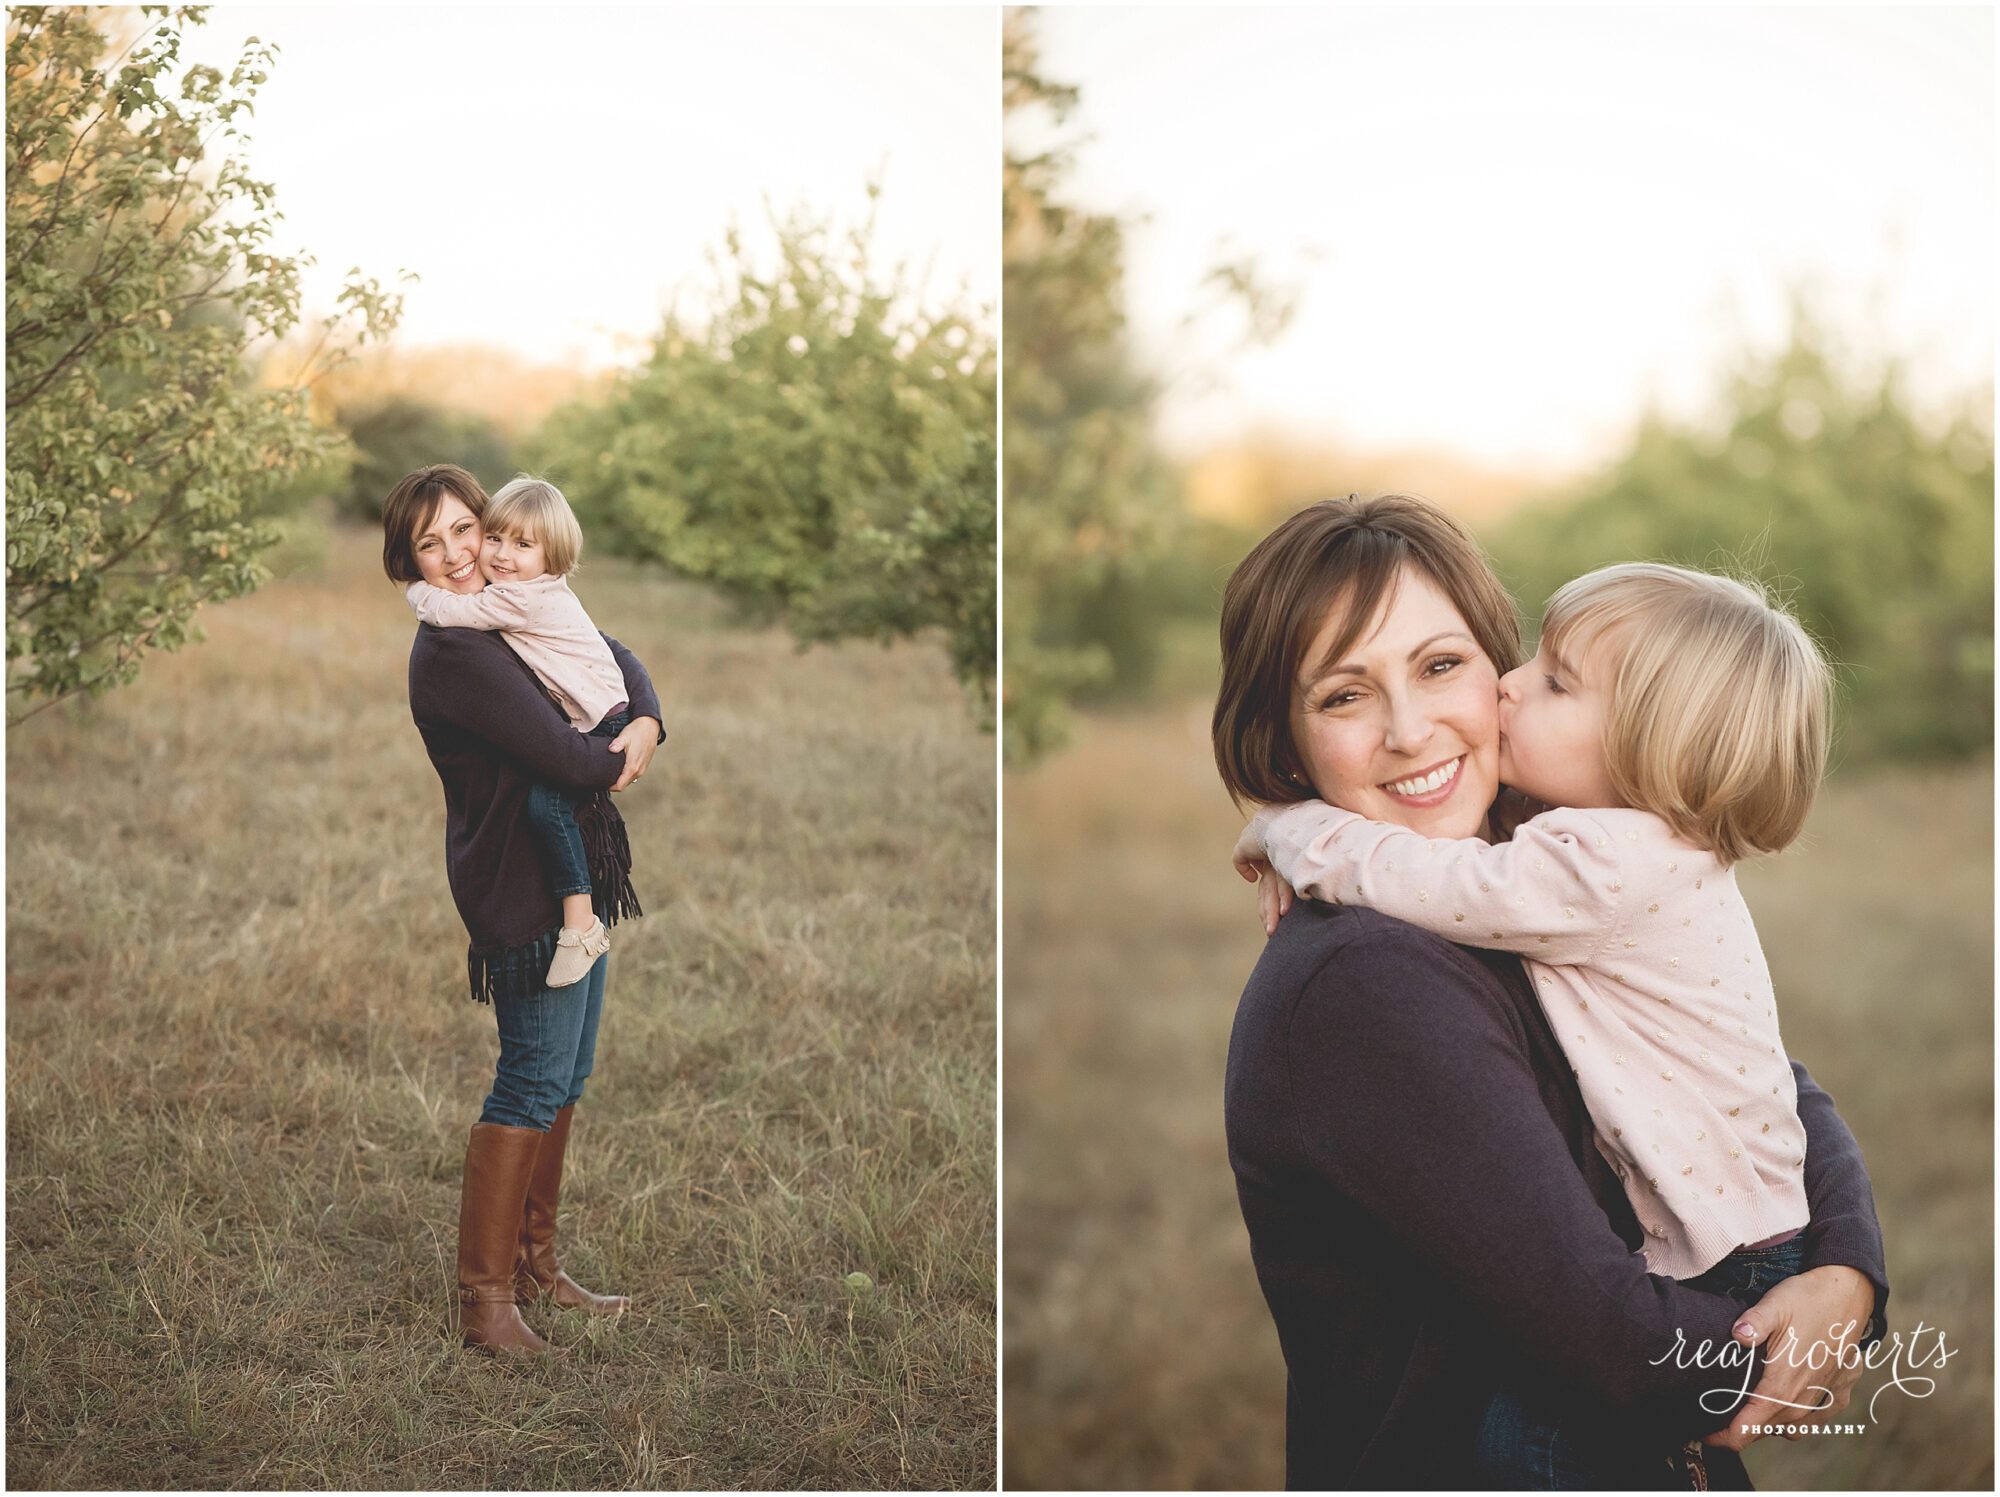 Little girl with momma, fall family photography | Reaj Roberts Photography